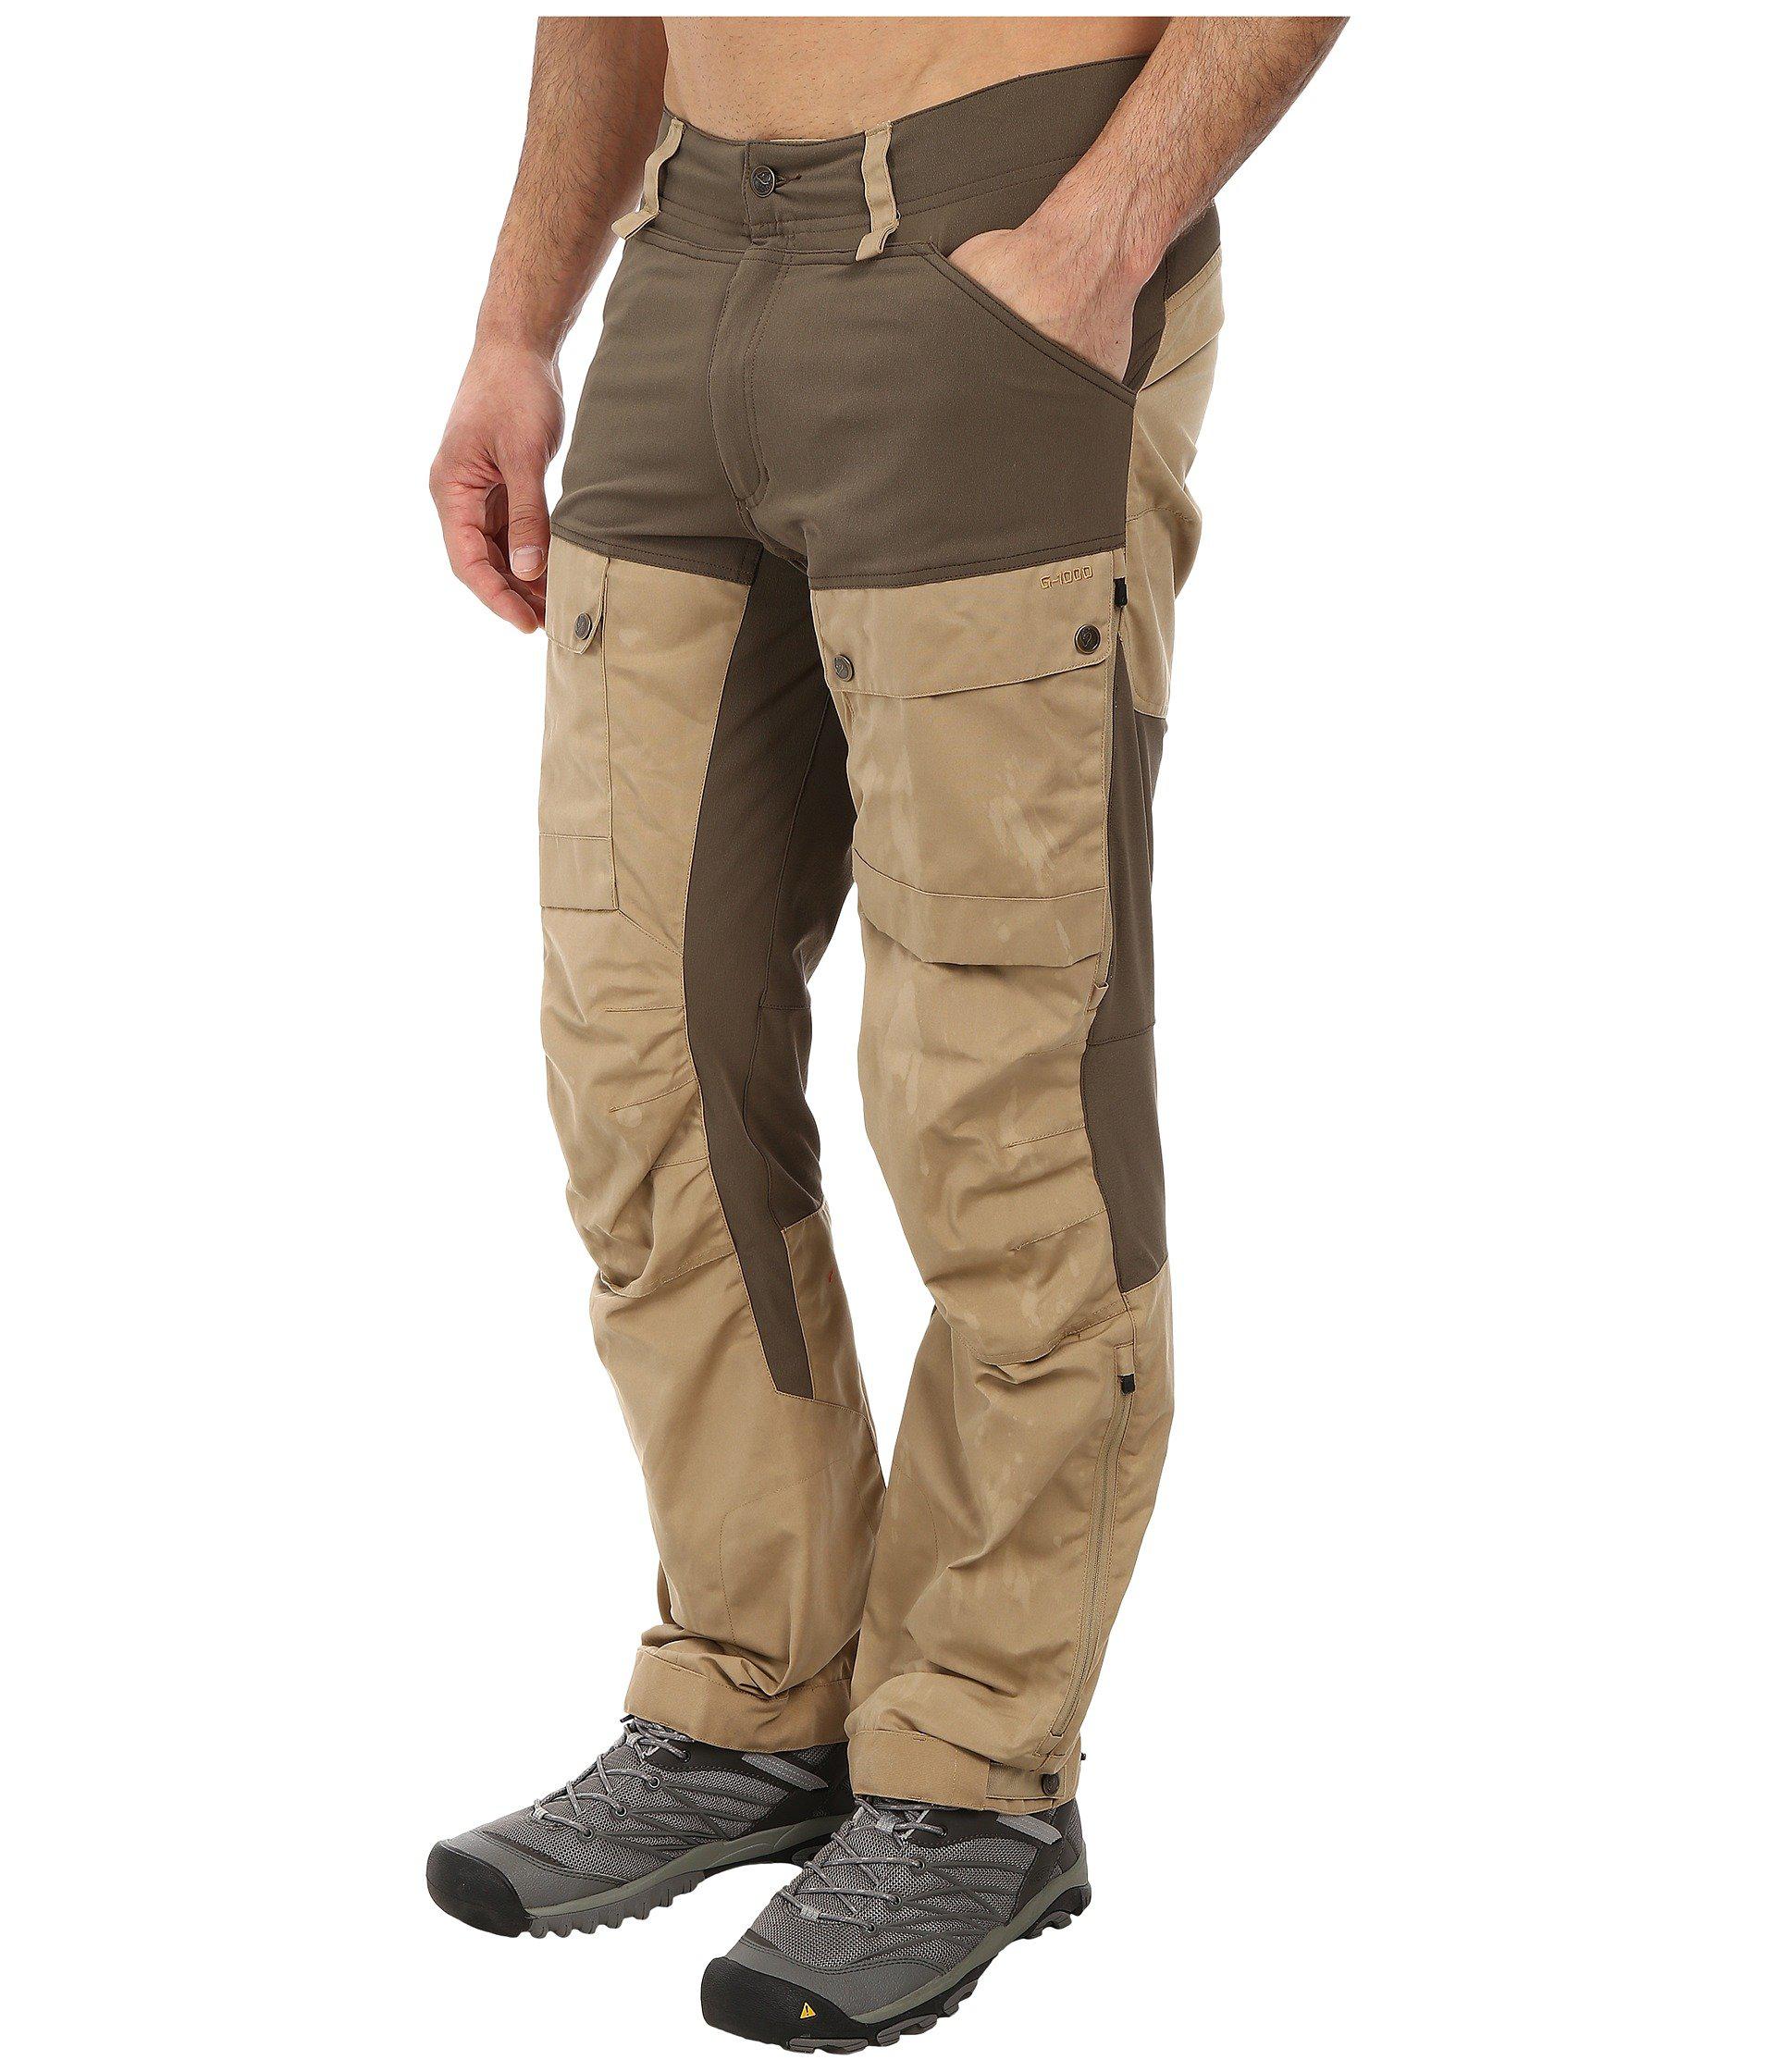 Fjallraven Synthetic Keb Trousers in Sand (Natural) for Men - Lyst